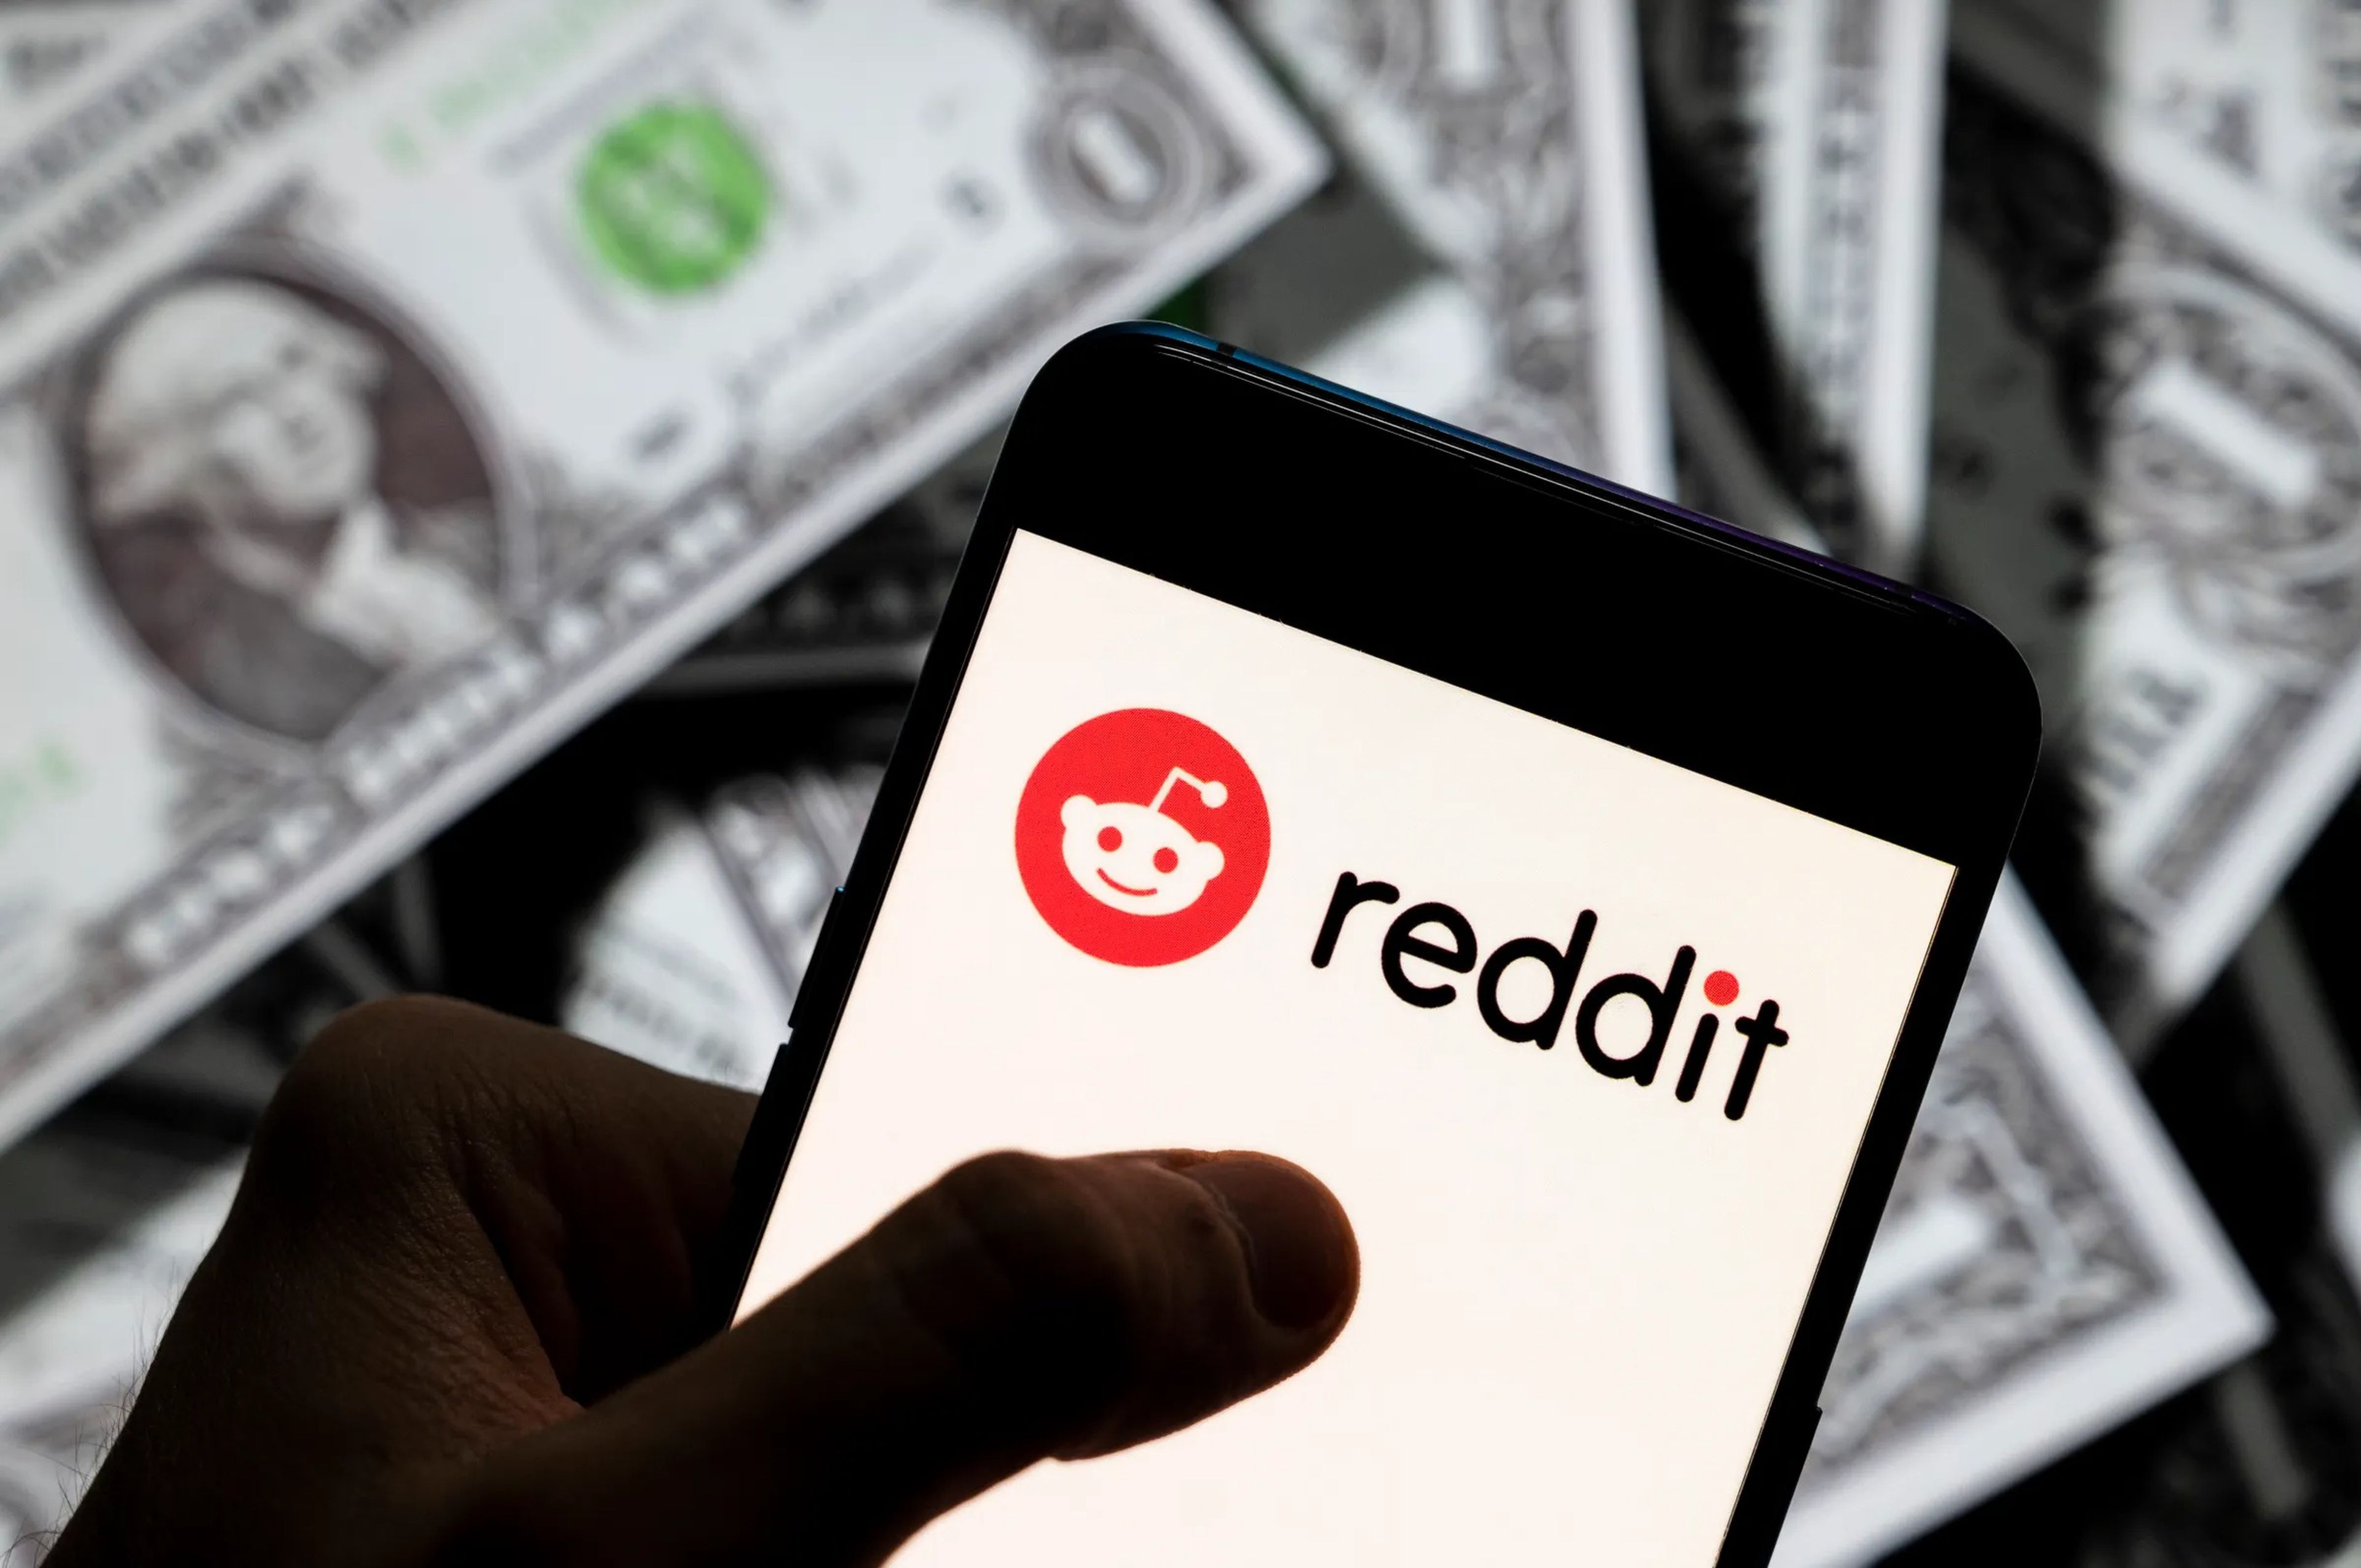 Reddit logo on a cell phone with images of dollar bill in the background.